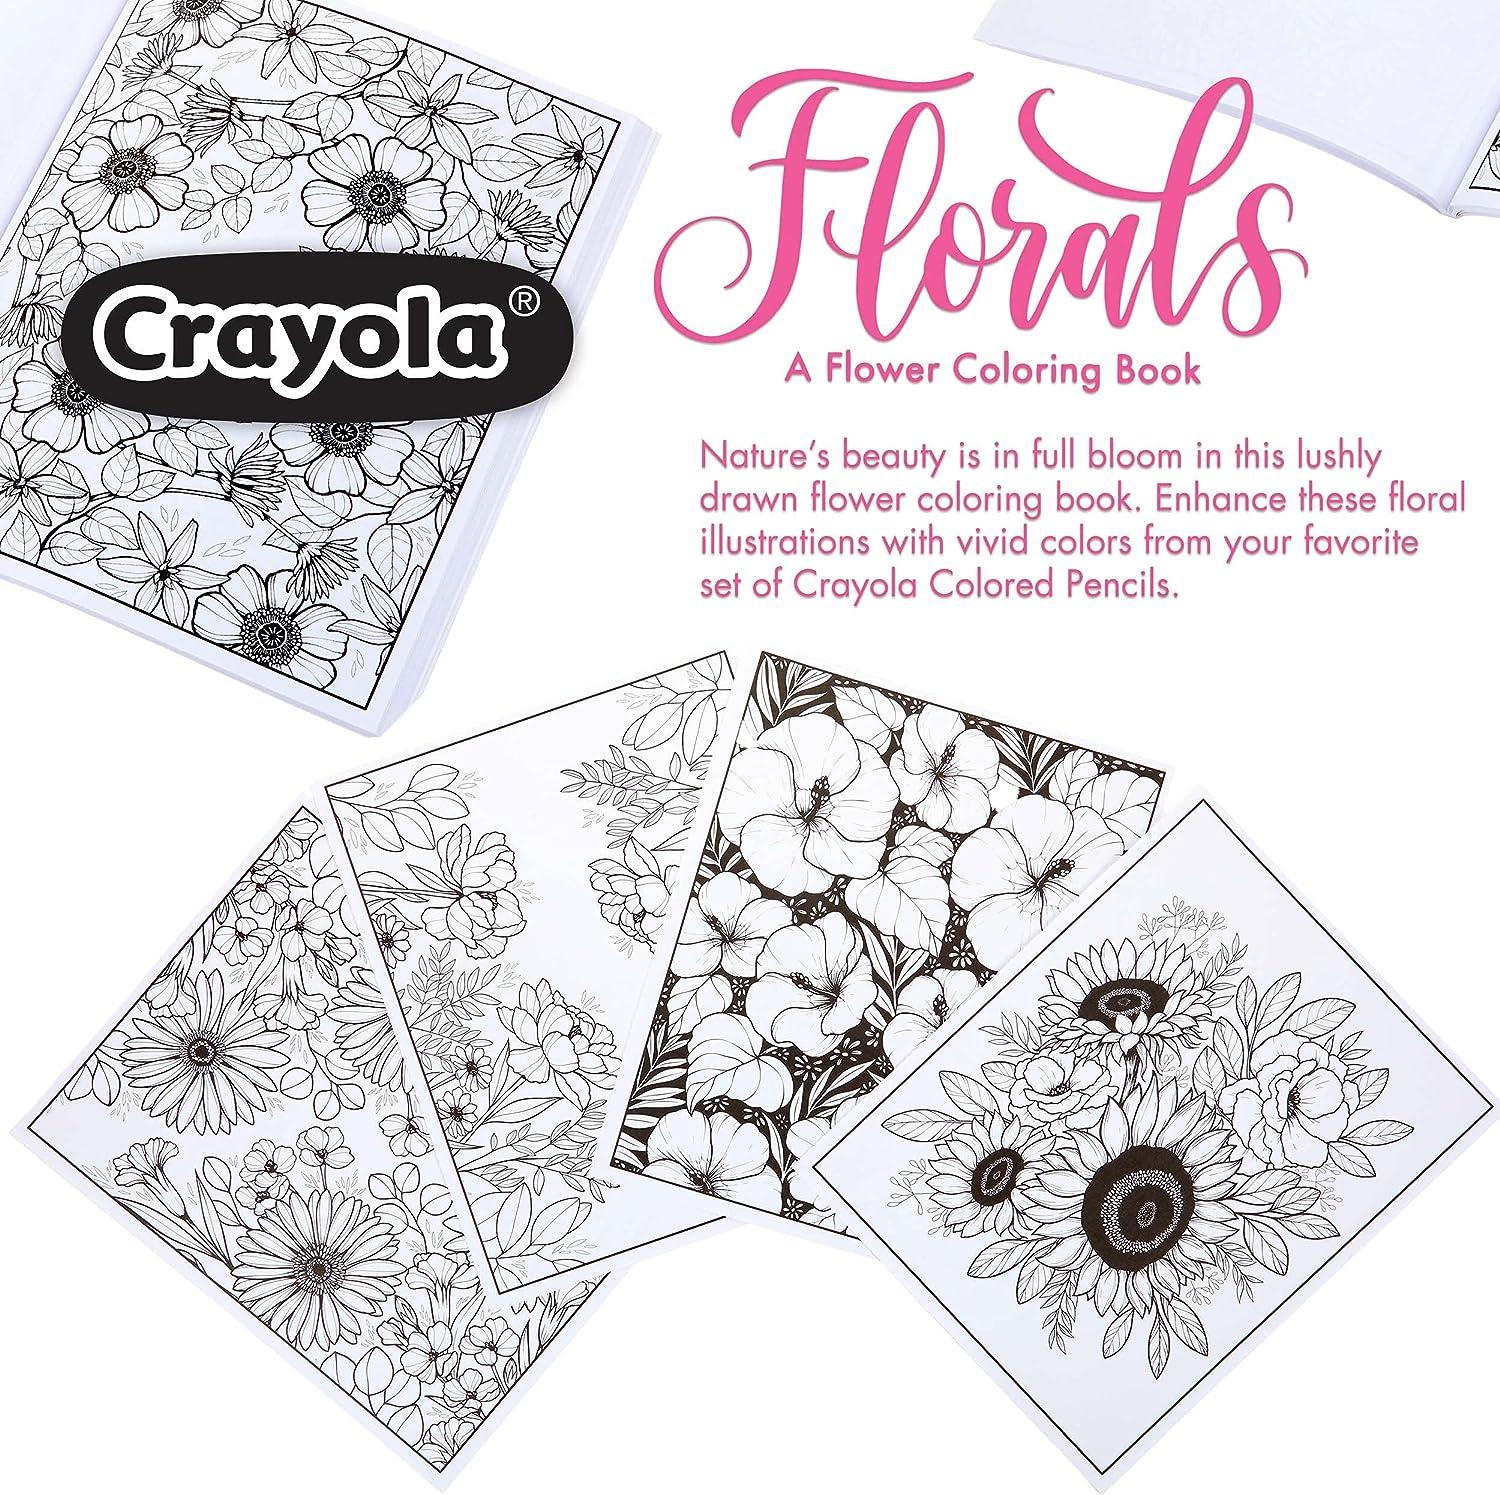 Crayola flower coloring book premium adult coloring pages gift multi florals